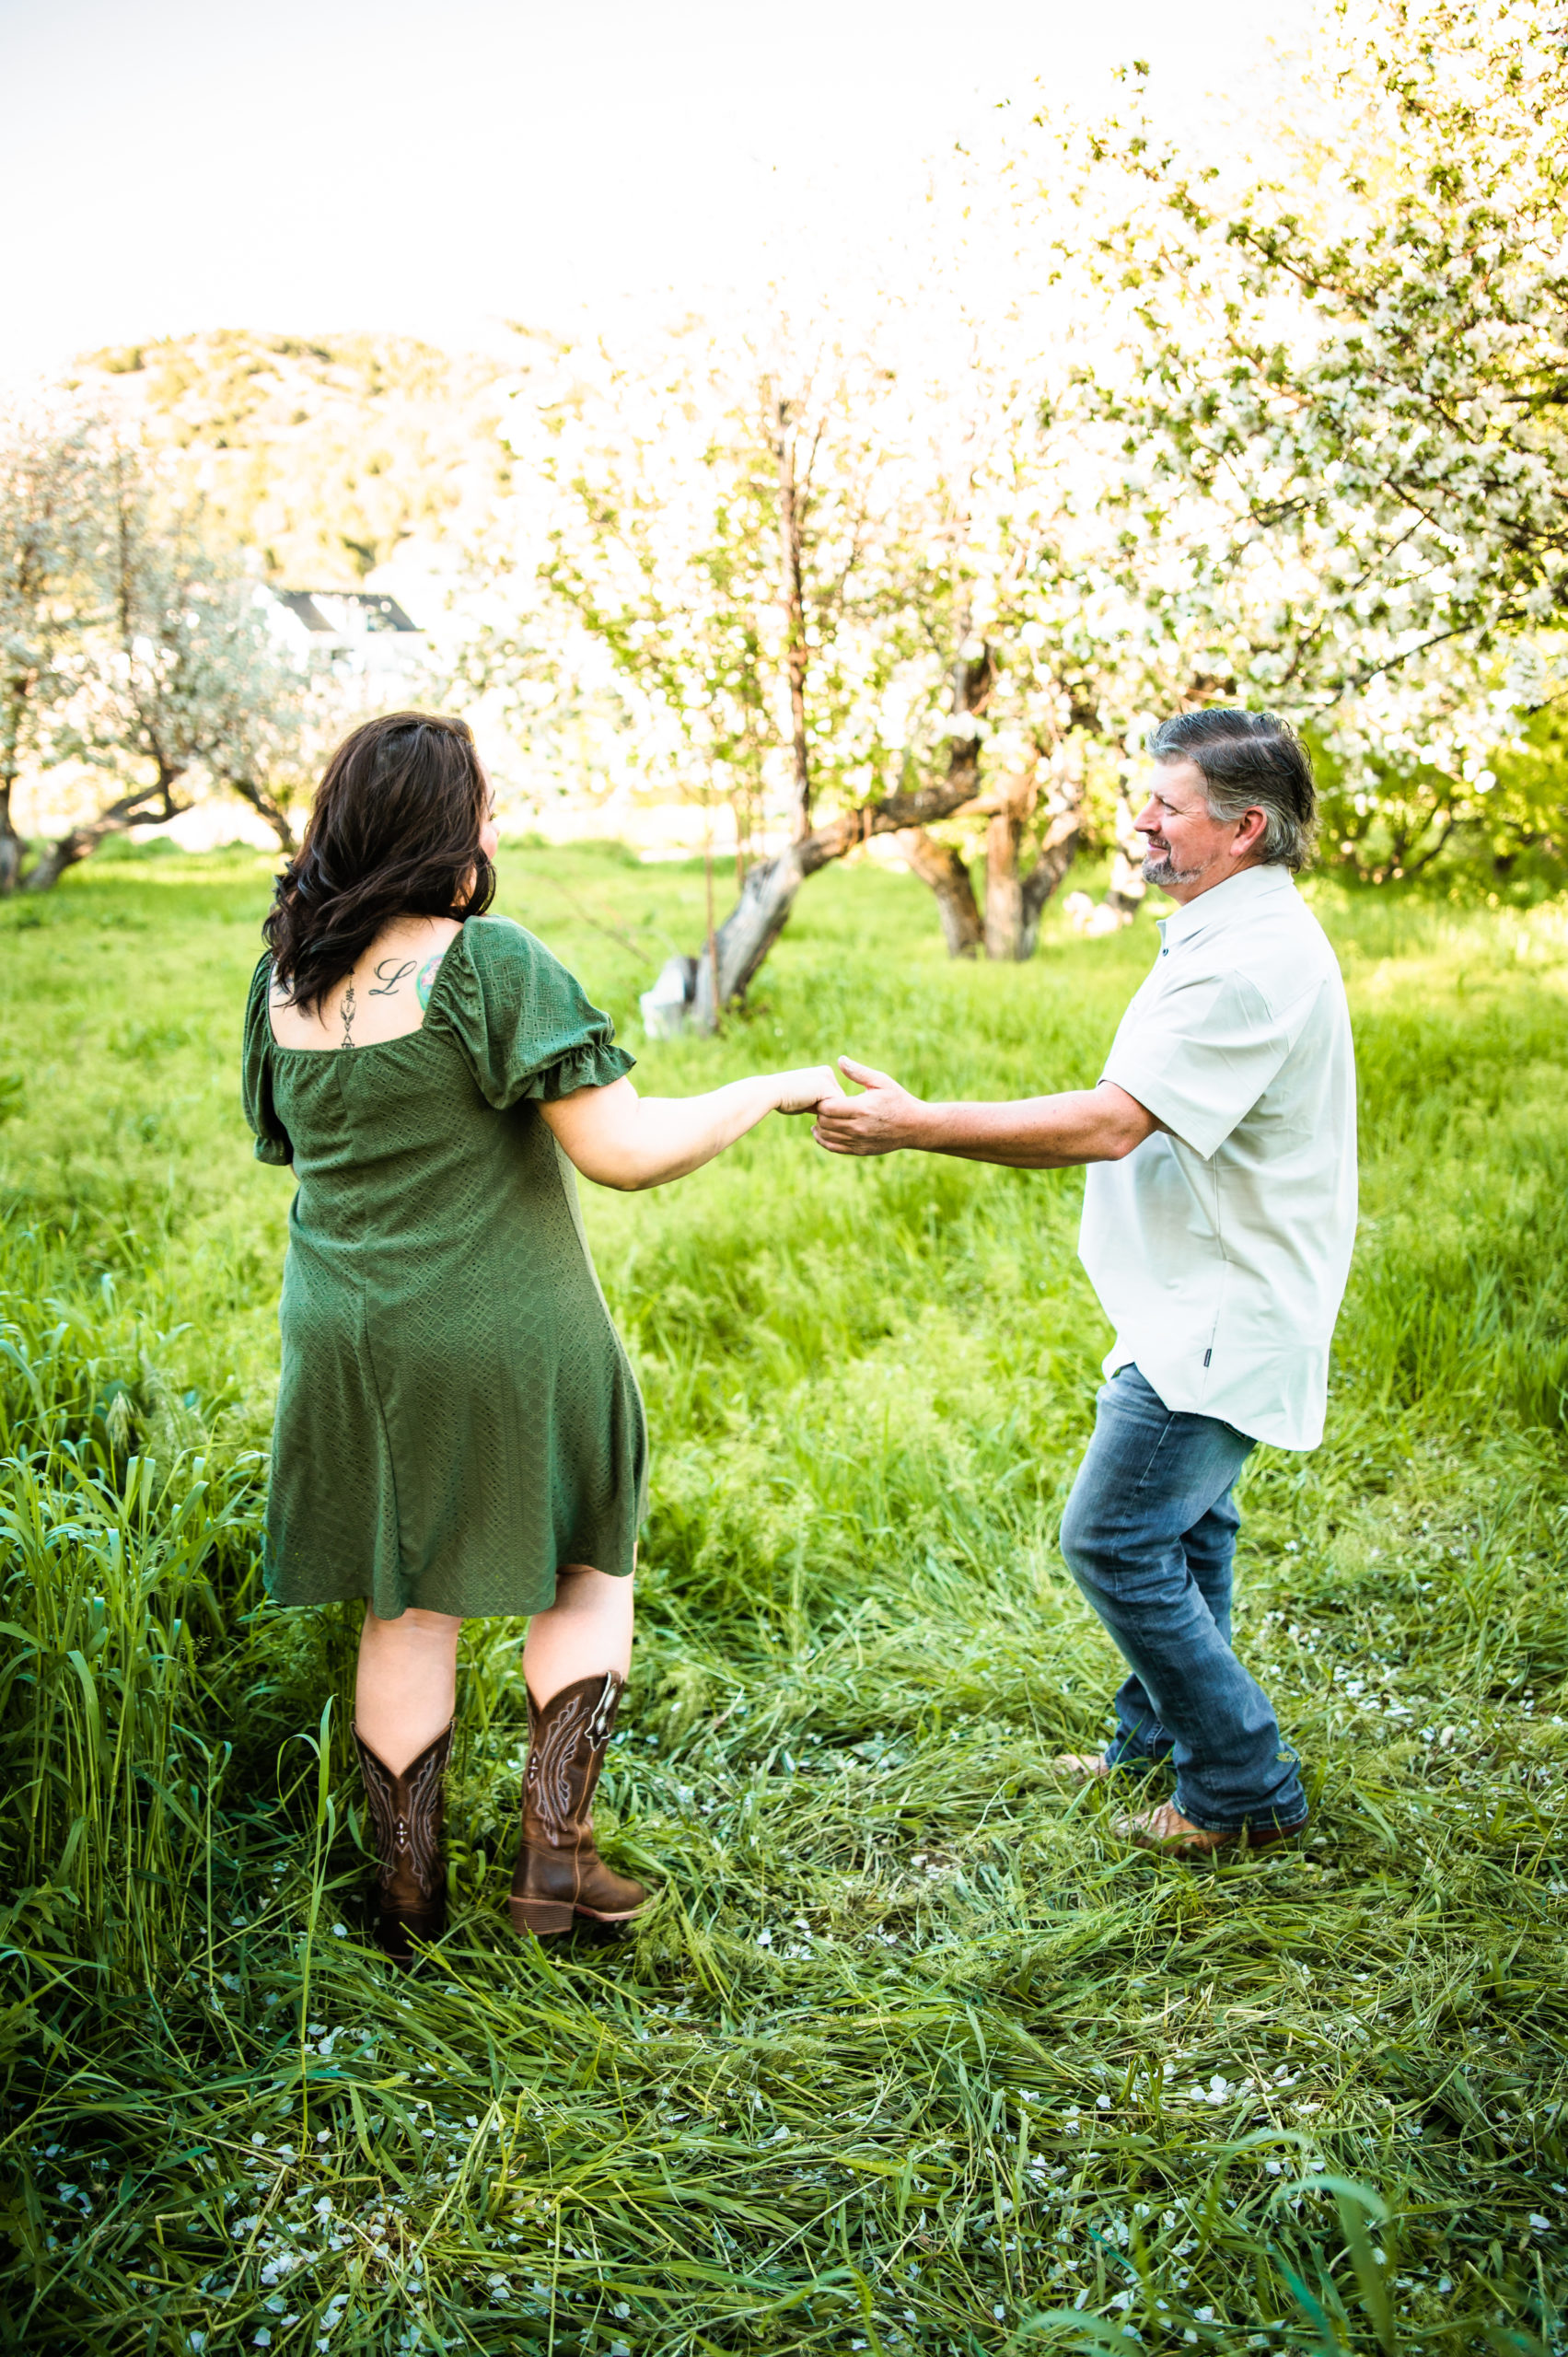 newly engaged couple dancing together in long green grass